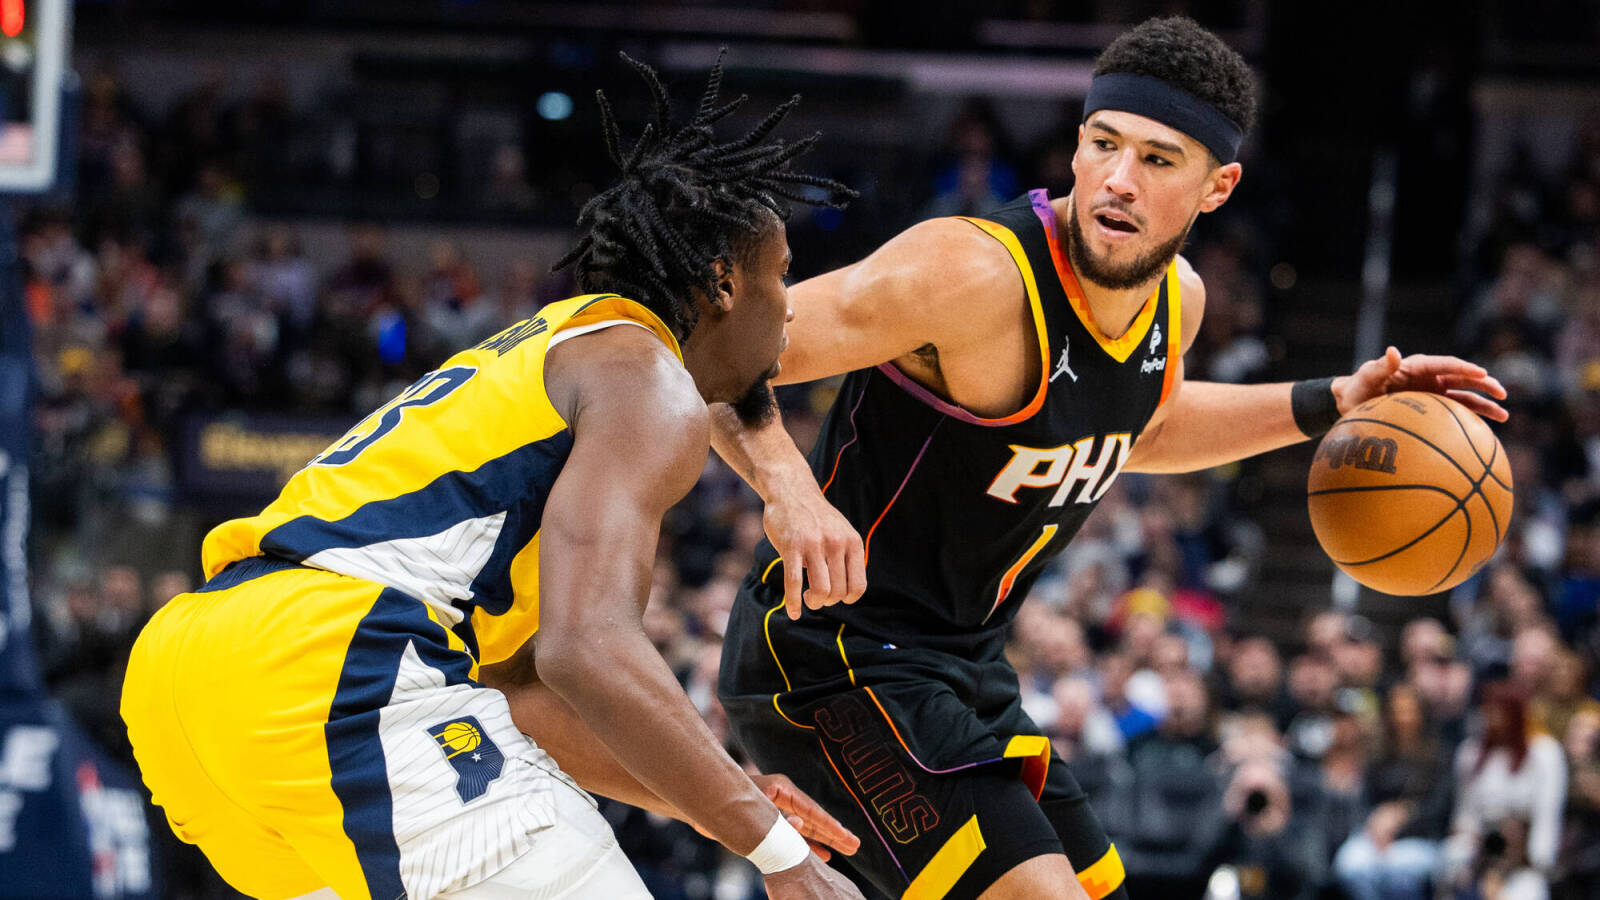 Suns' Devin Booker achieves outrageous feat with 62-point game vs. Pacers